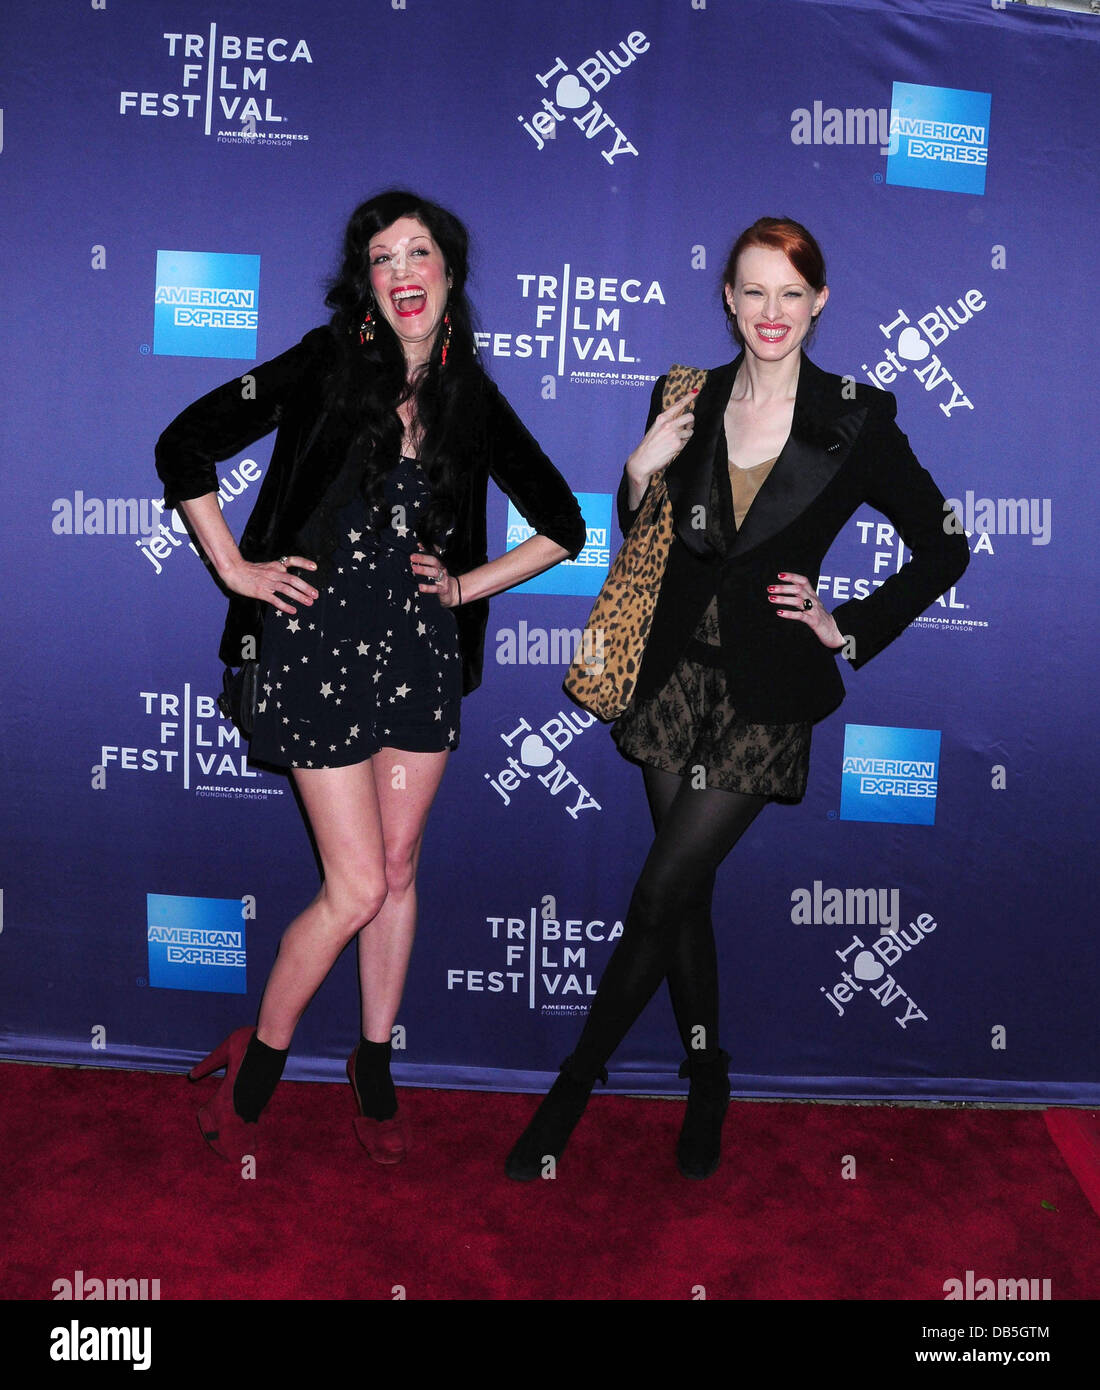 Karen Elson and guest 2011 Tribeca Film Festival Premiere of 'Janie Jones' at the SVA Theater - Arrivals New York City, USA - 29.04.11 Stock Photo